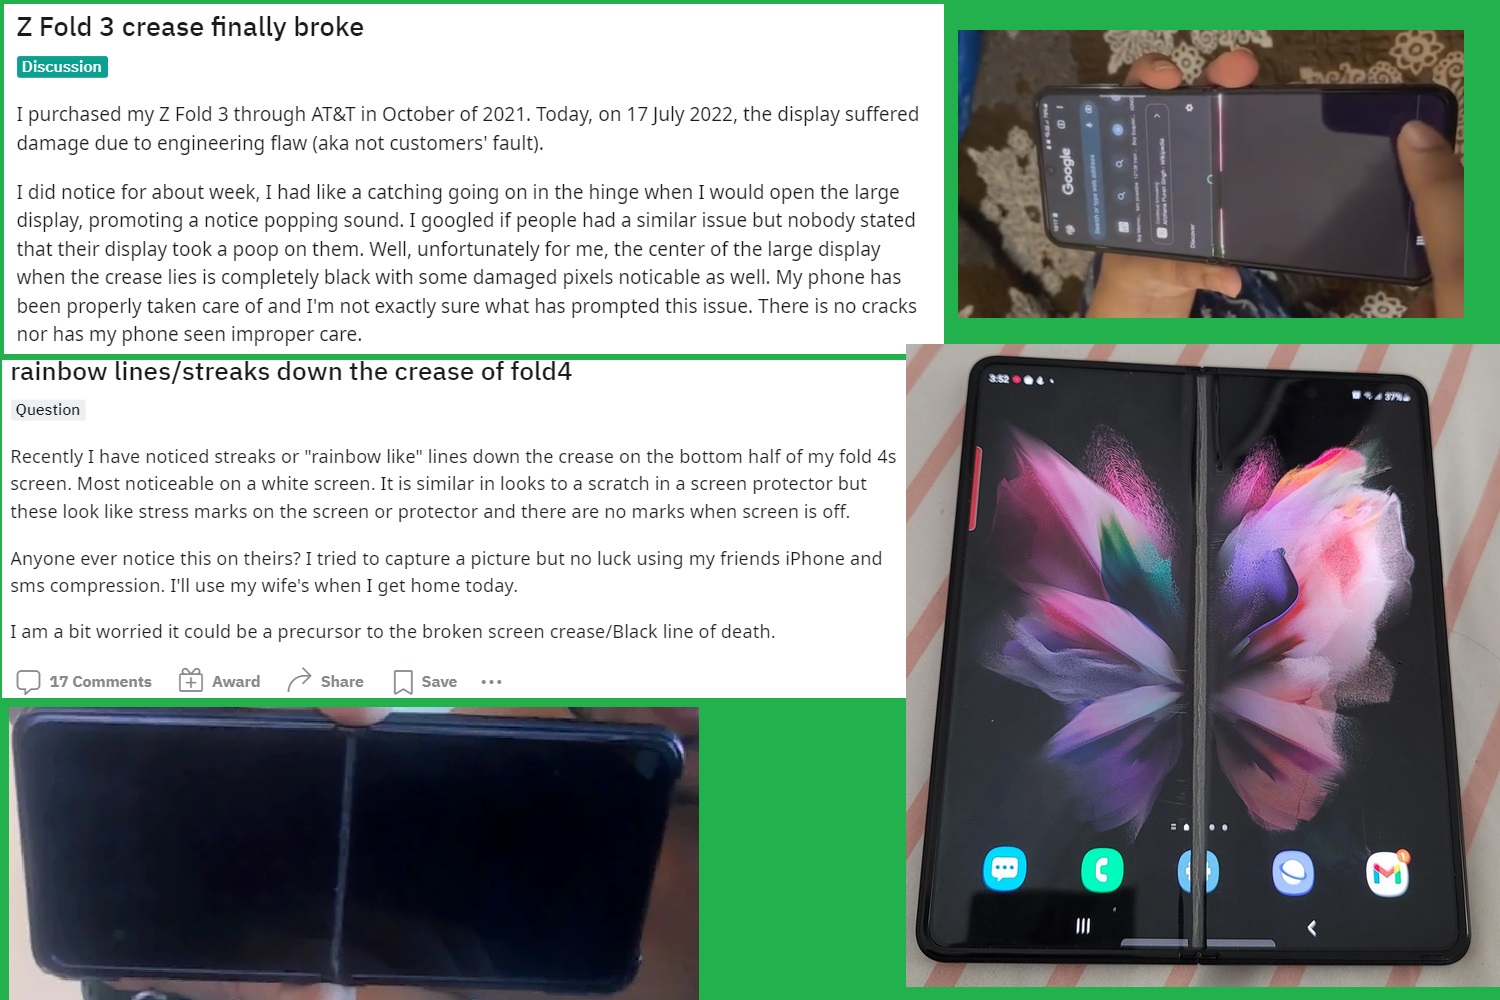 Images and posts depicting issues with Samsung foldable phones